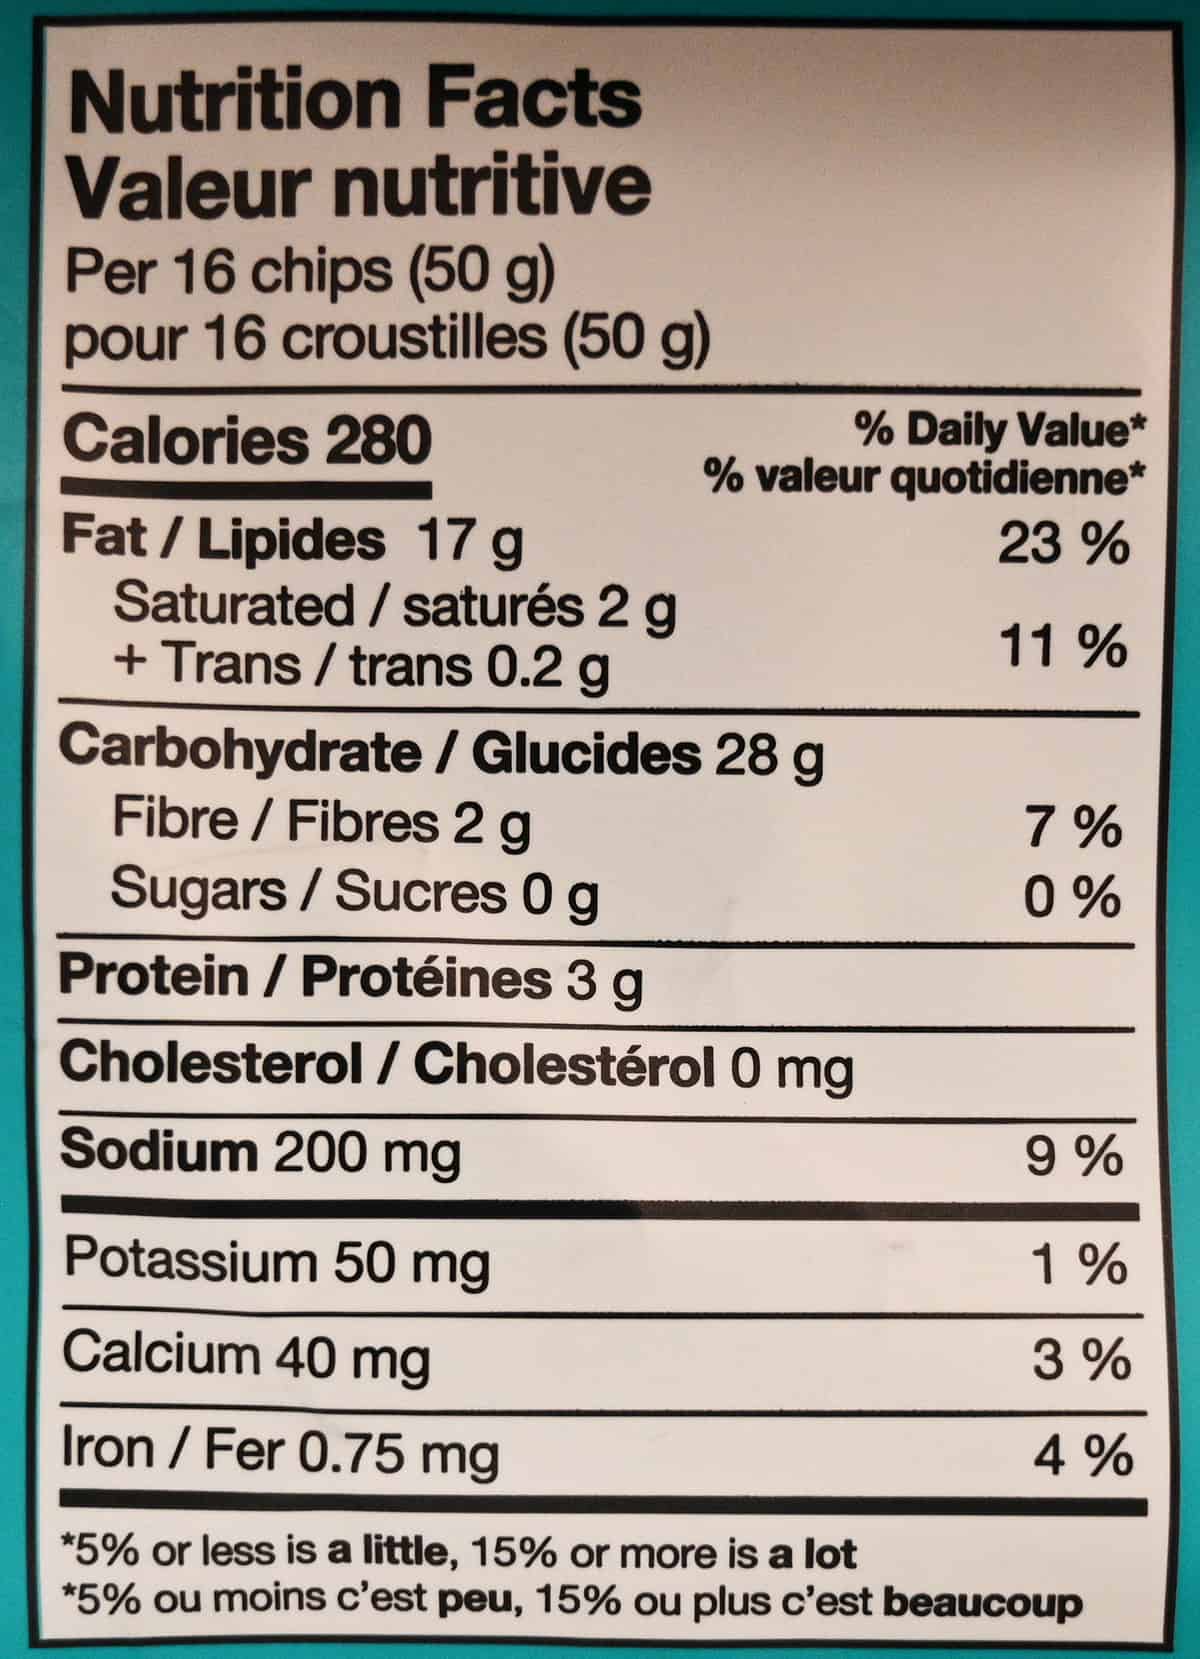 Image of the nutrition facts label from the back of the bag.